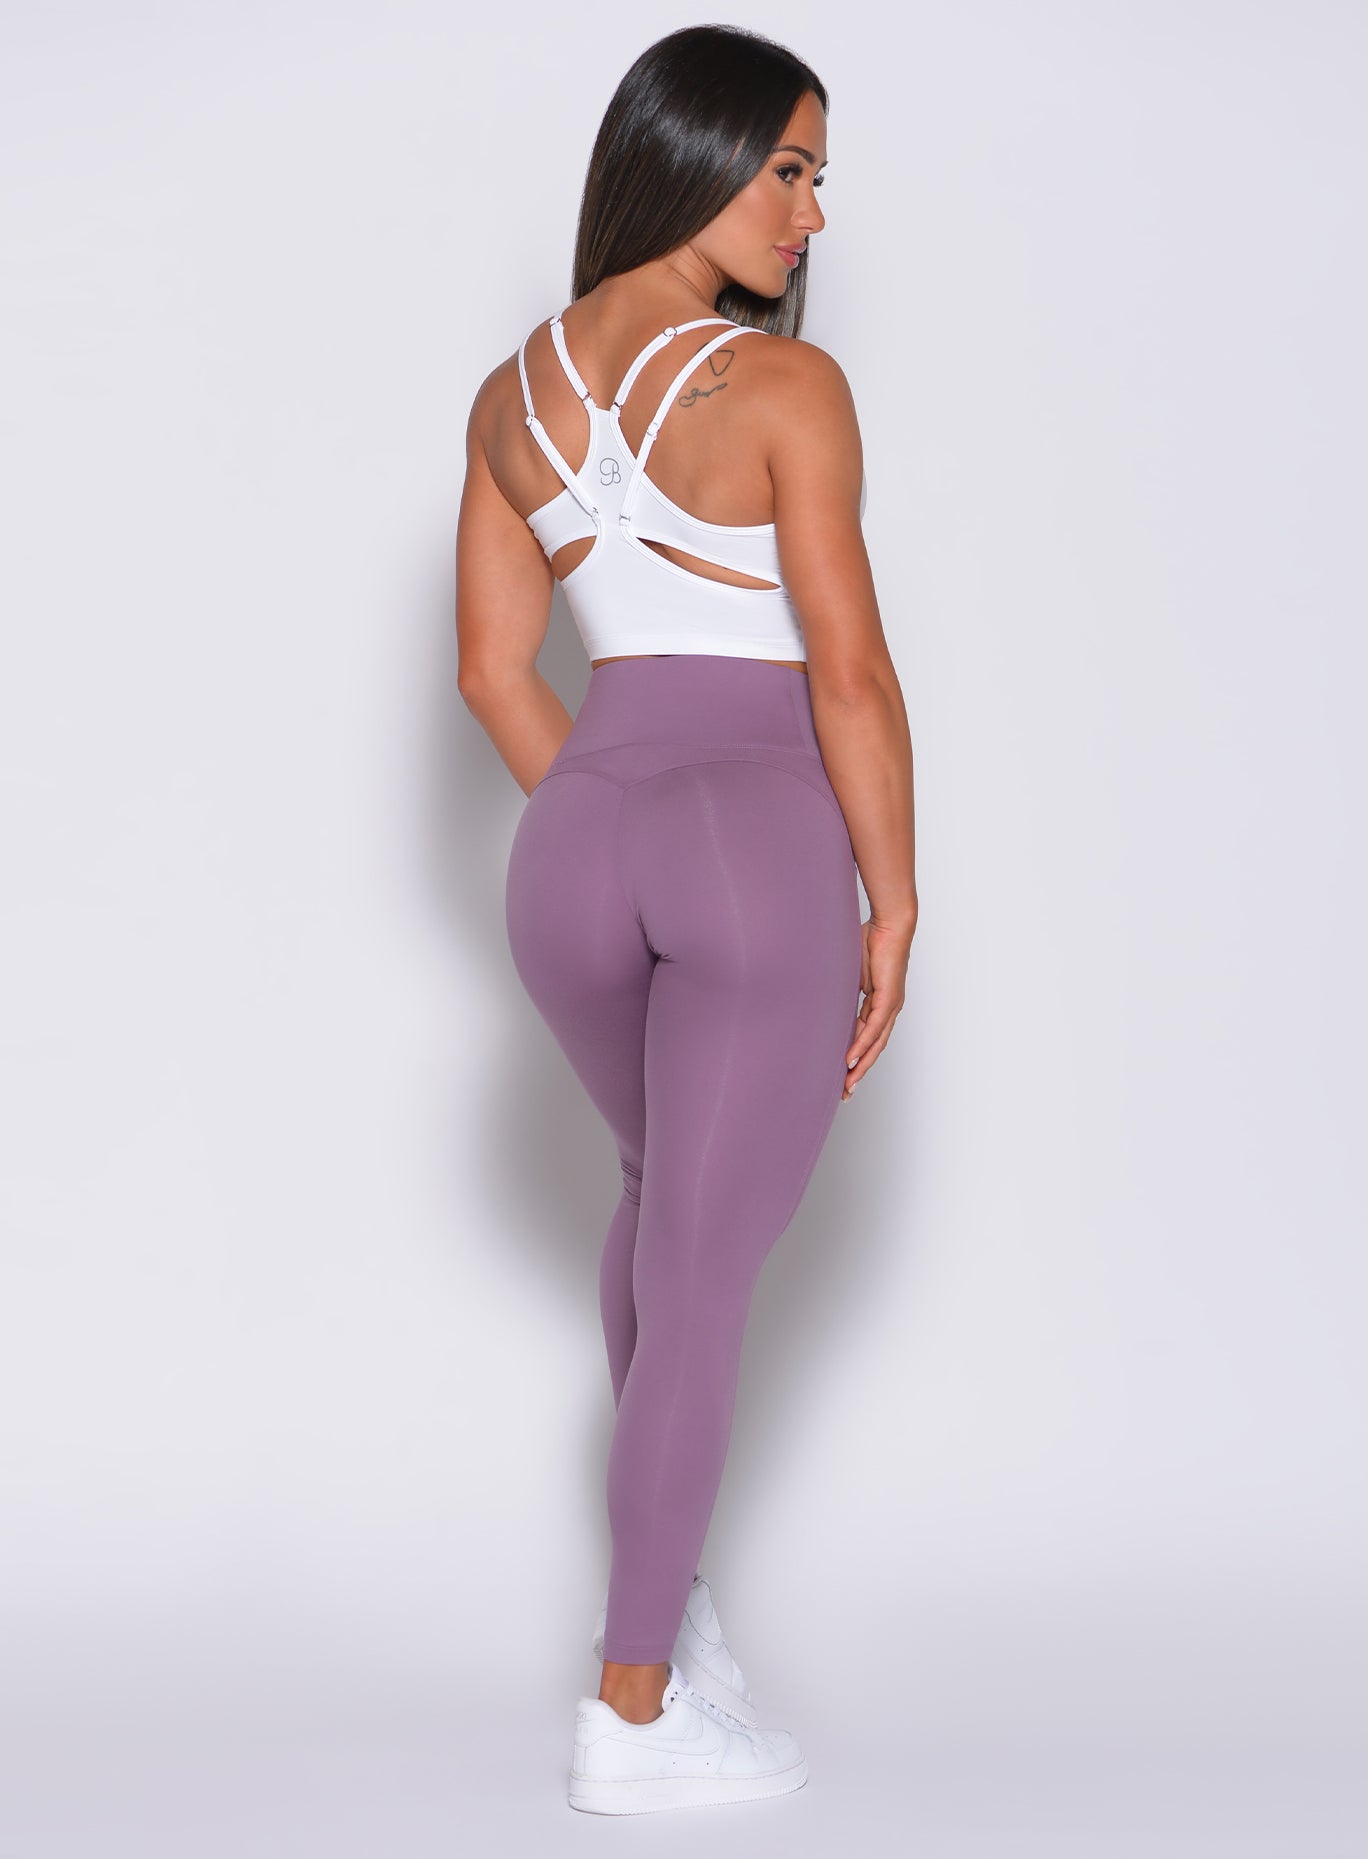 Back profile view of a model in our snatched waist leggings in violet frost color and a white sports bra